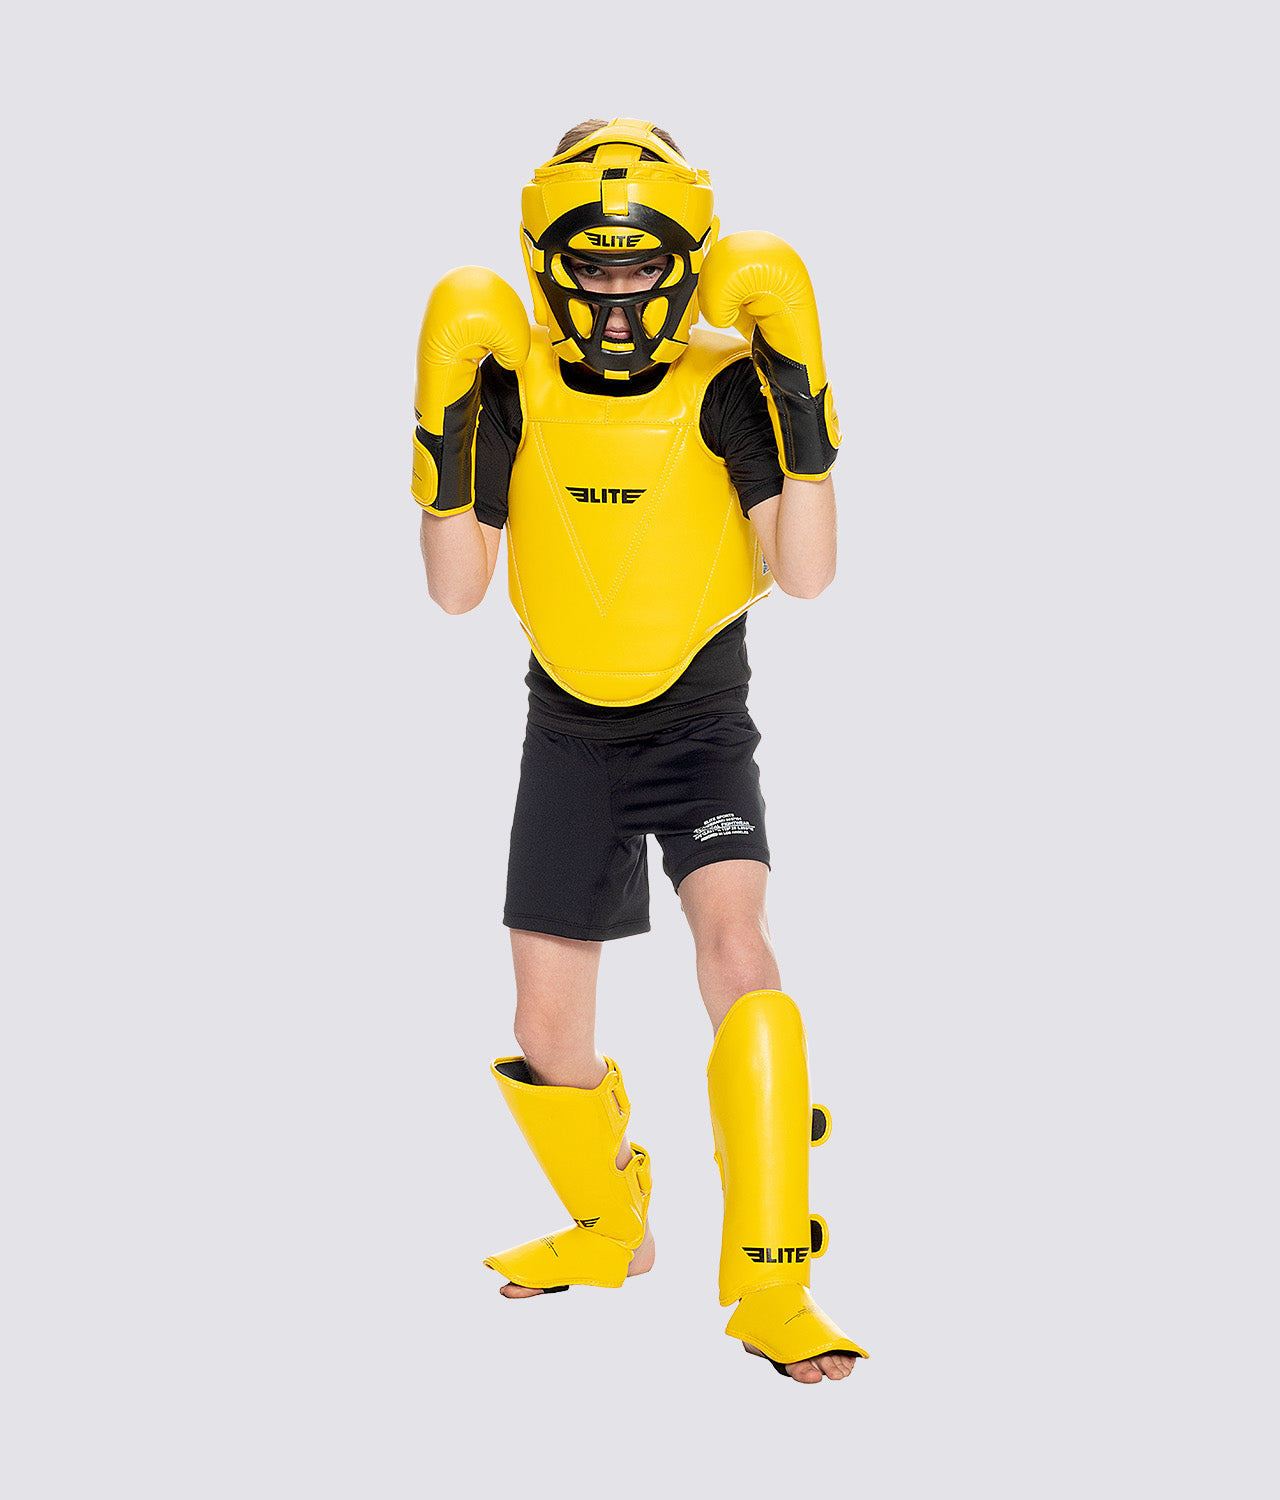 Elite Sports Kids' Yellow Boxing Chest Guard : 4 to 8 Years Full Look